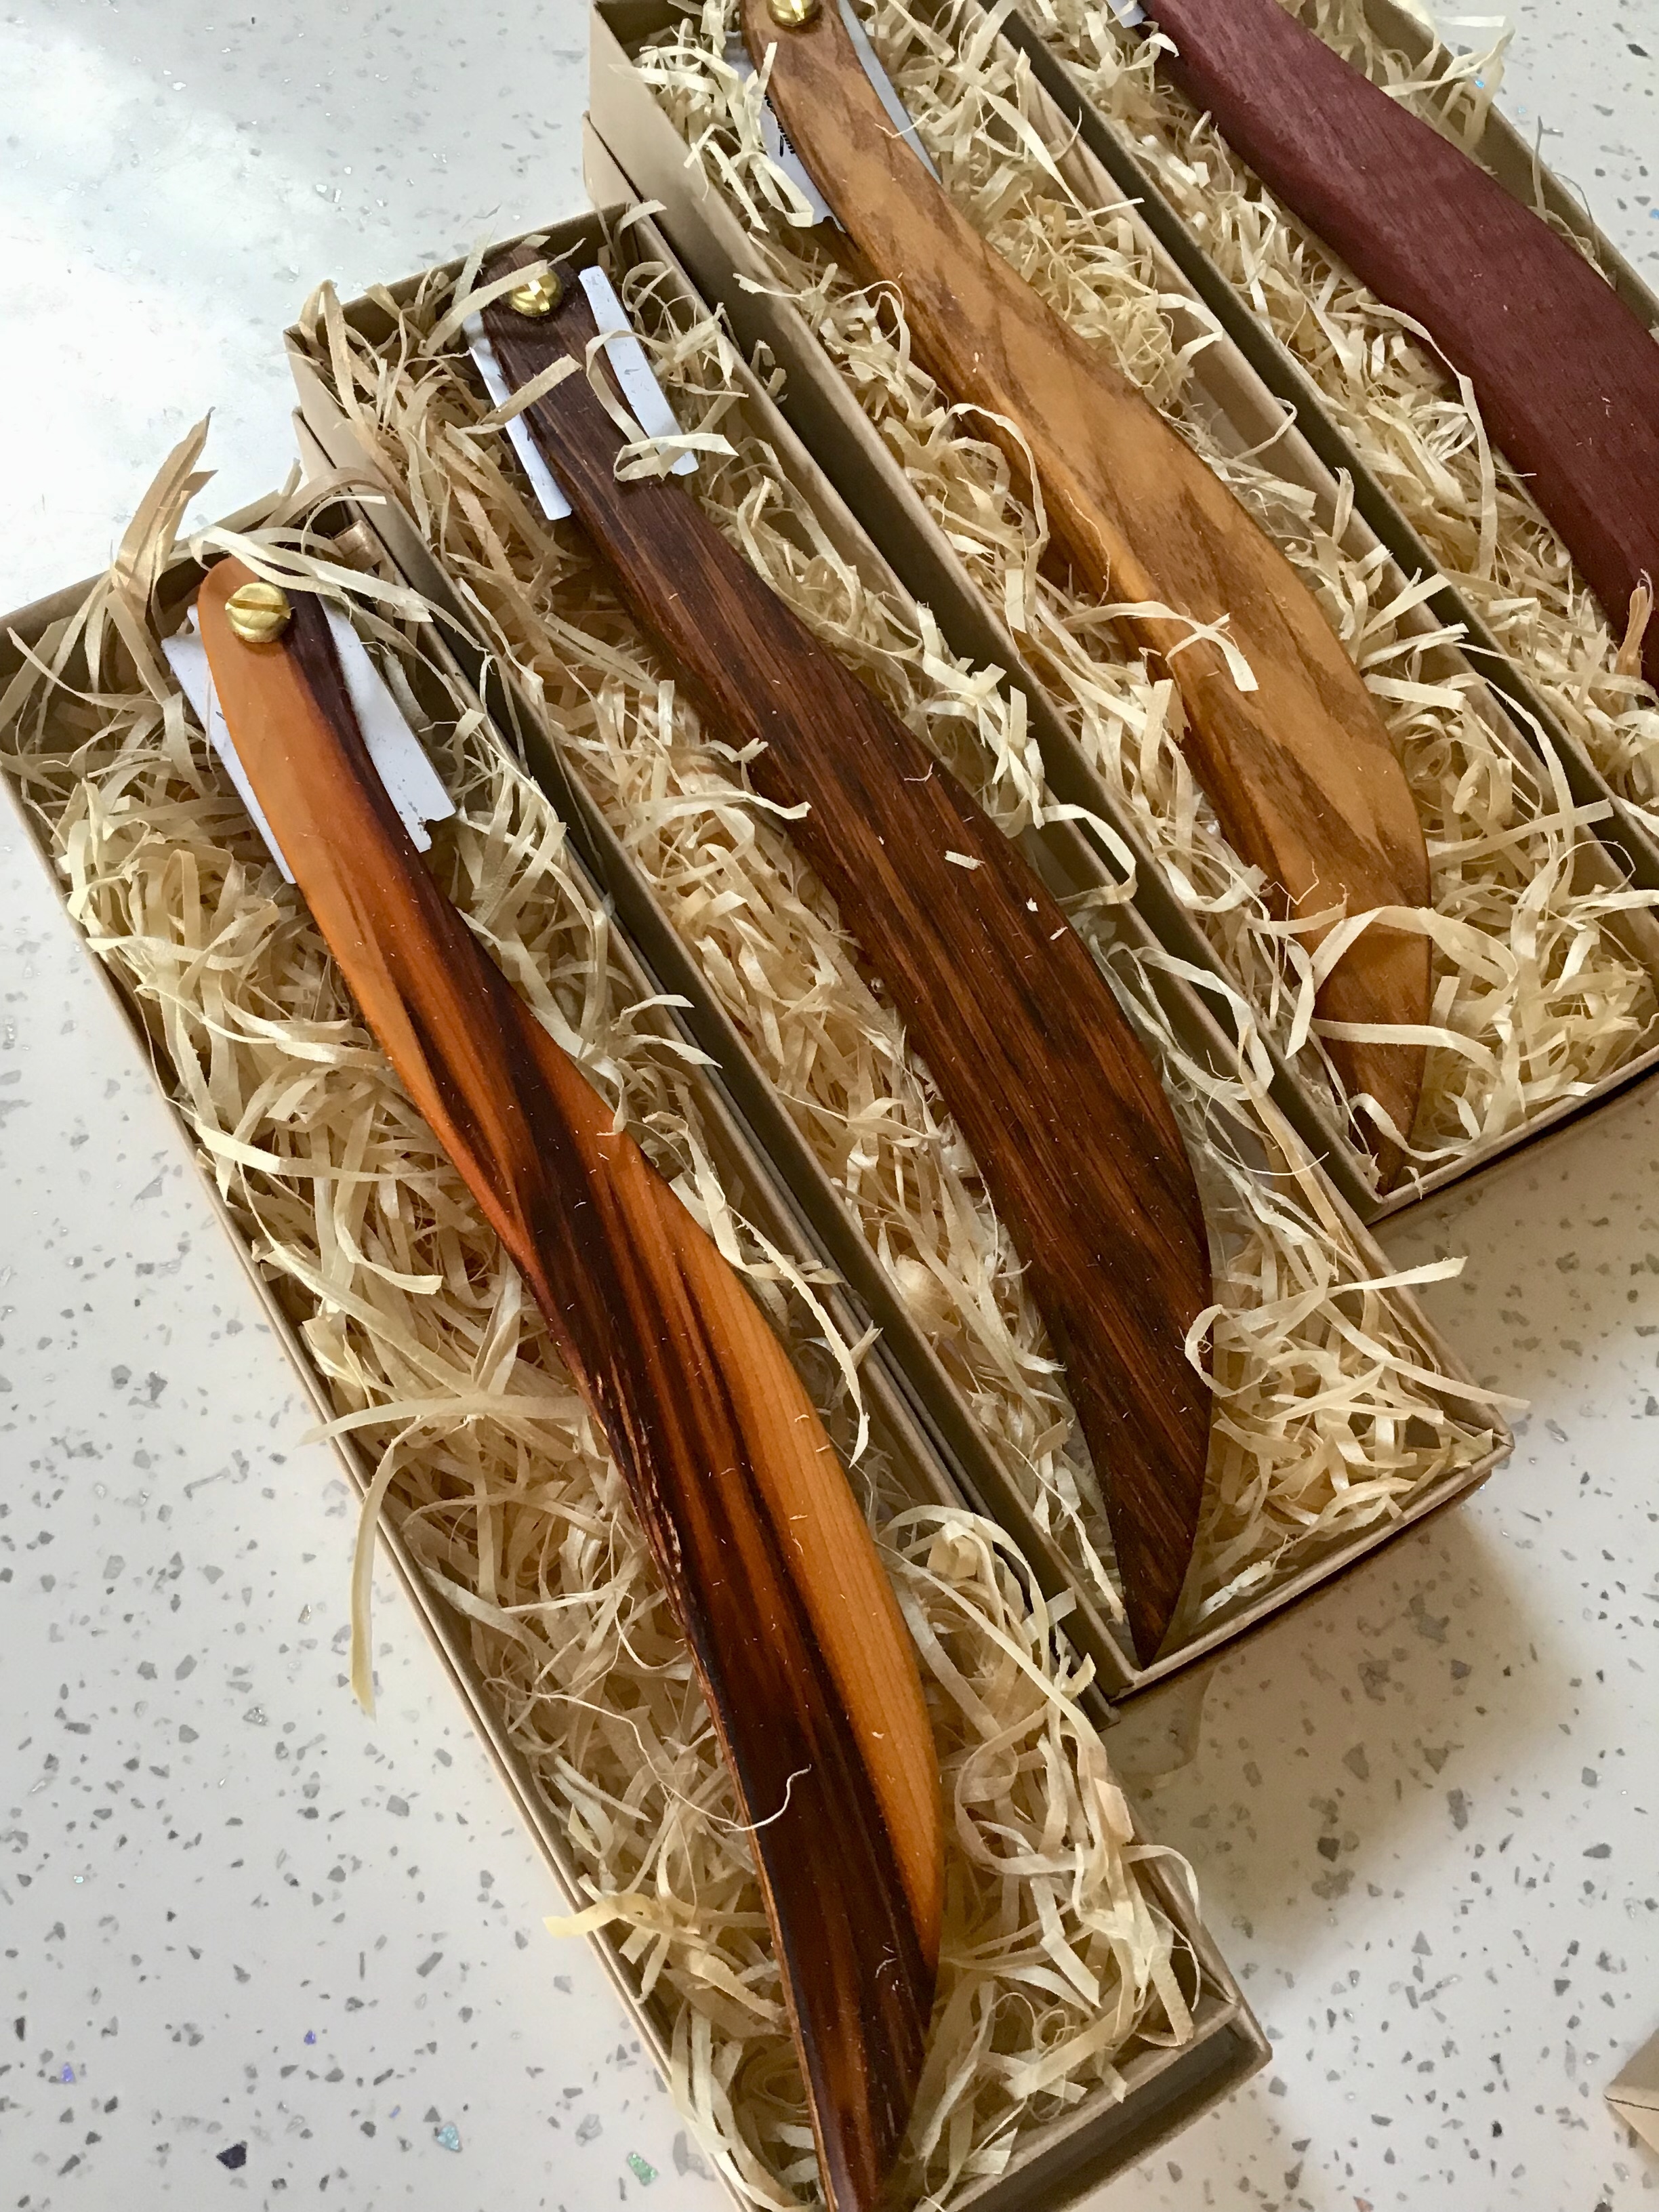 A box of wooden utensils in a gift box.